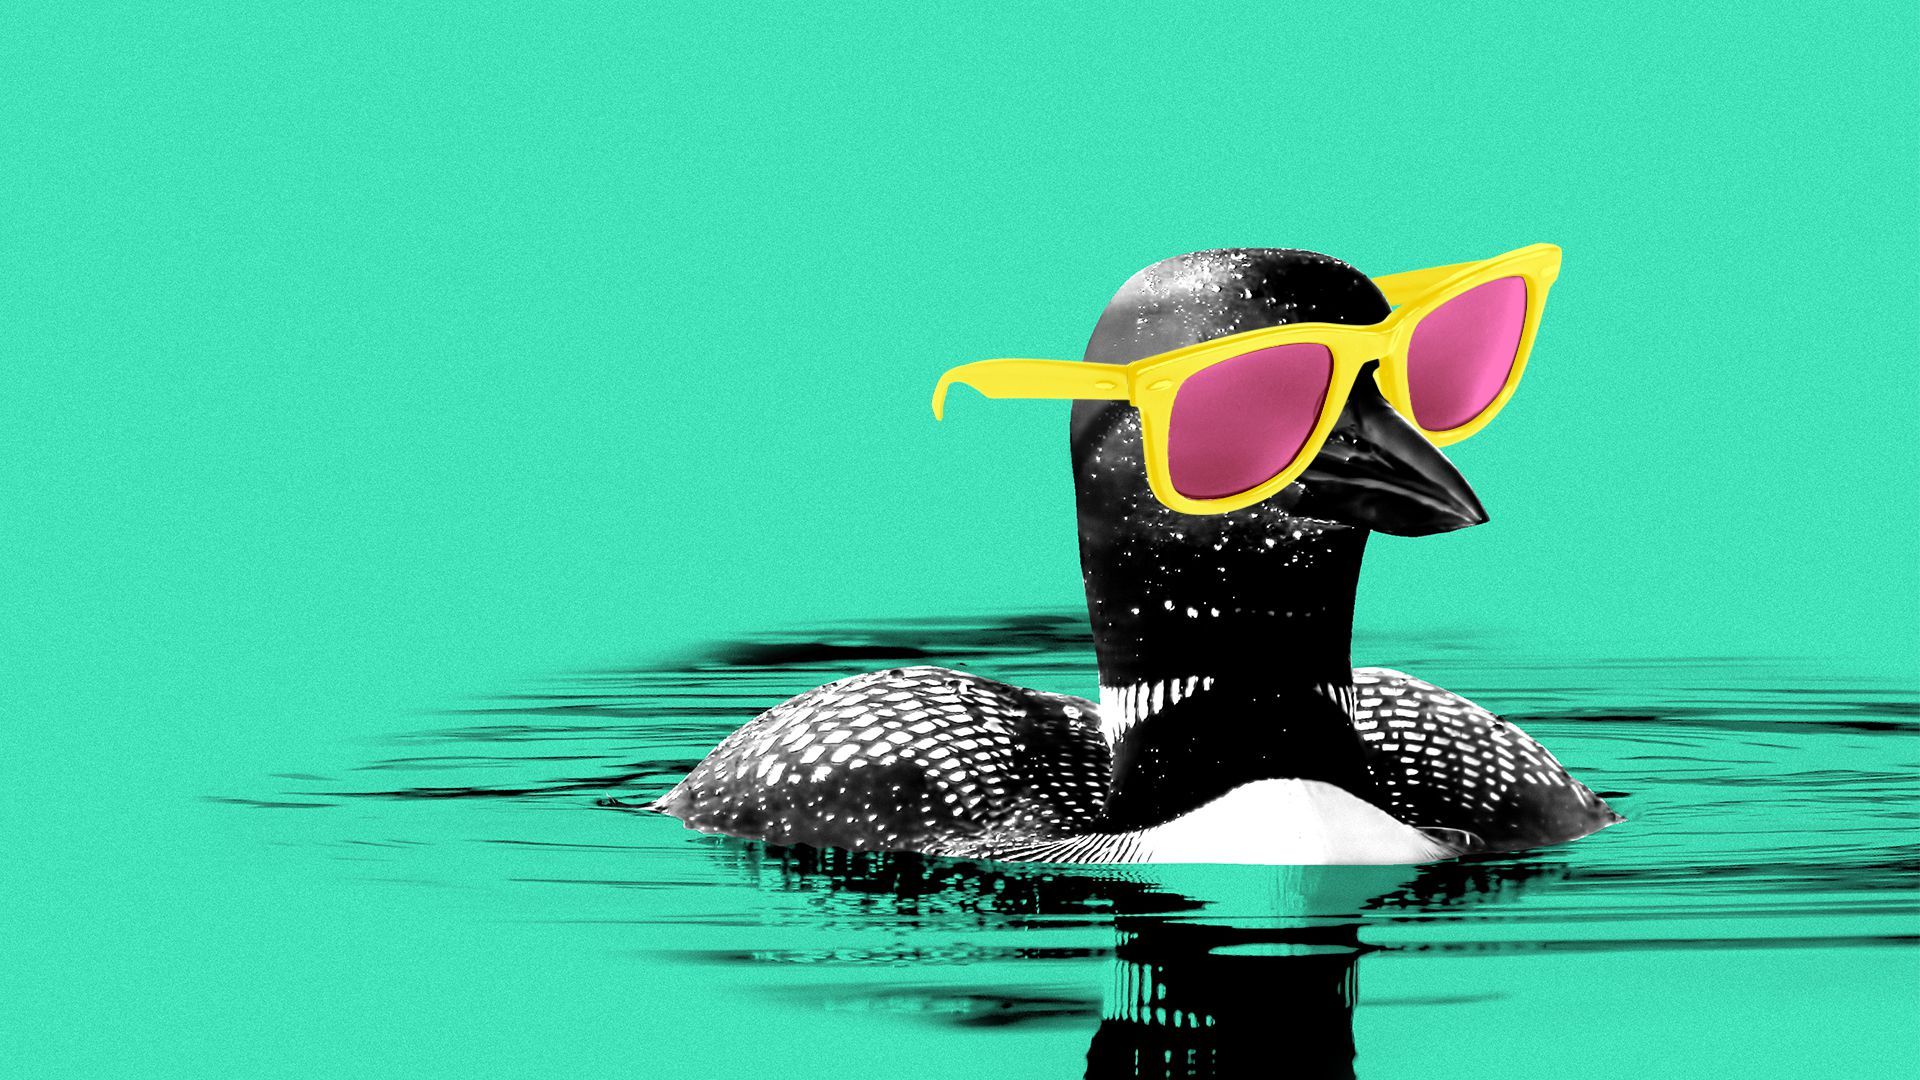 Illustration of a loon wearing sunglasses.